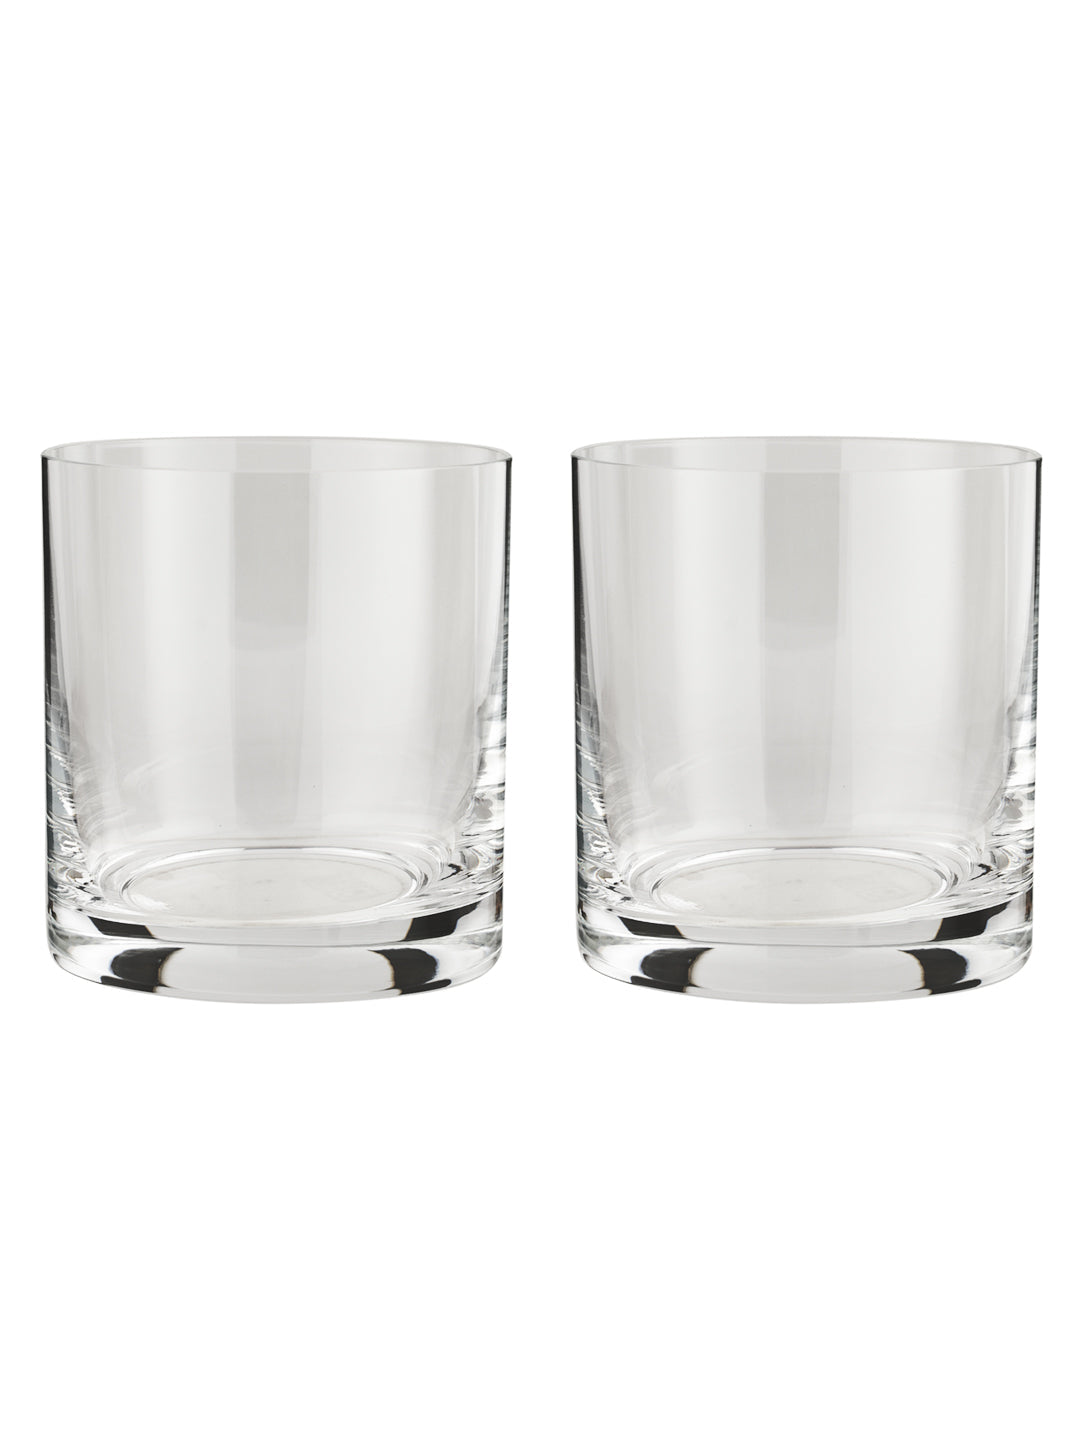 CLASSIC CRYSTAL WHISKEY GLASS - EUROPEAN CRYSTAL – SET OF 6